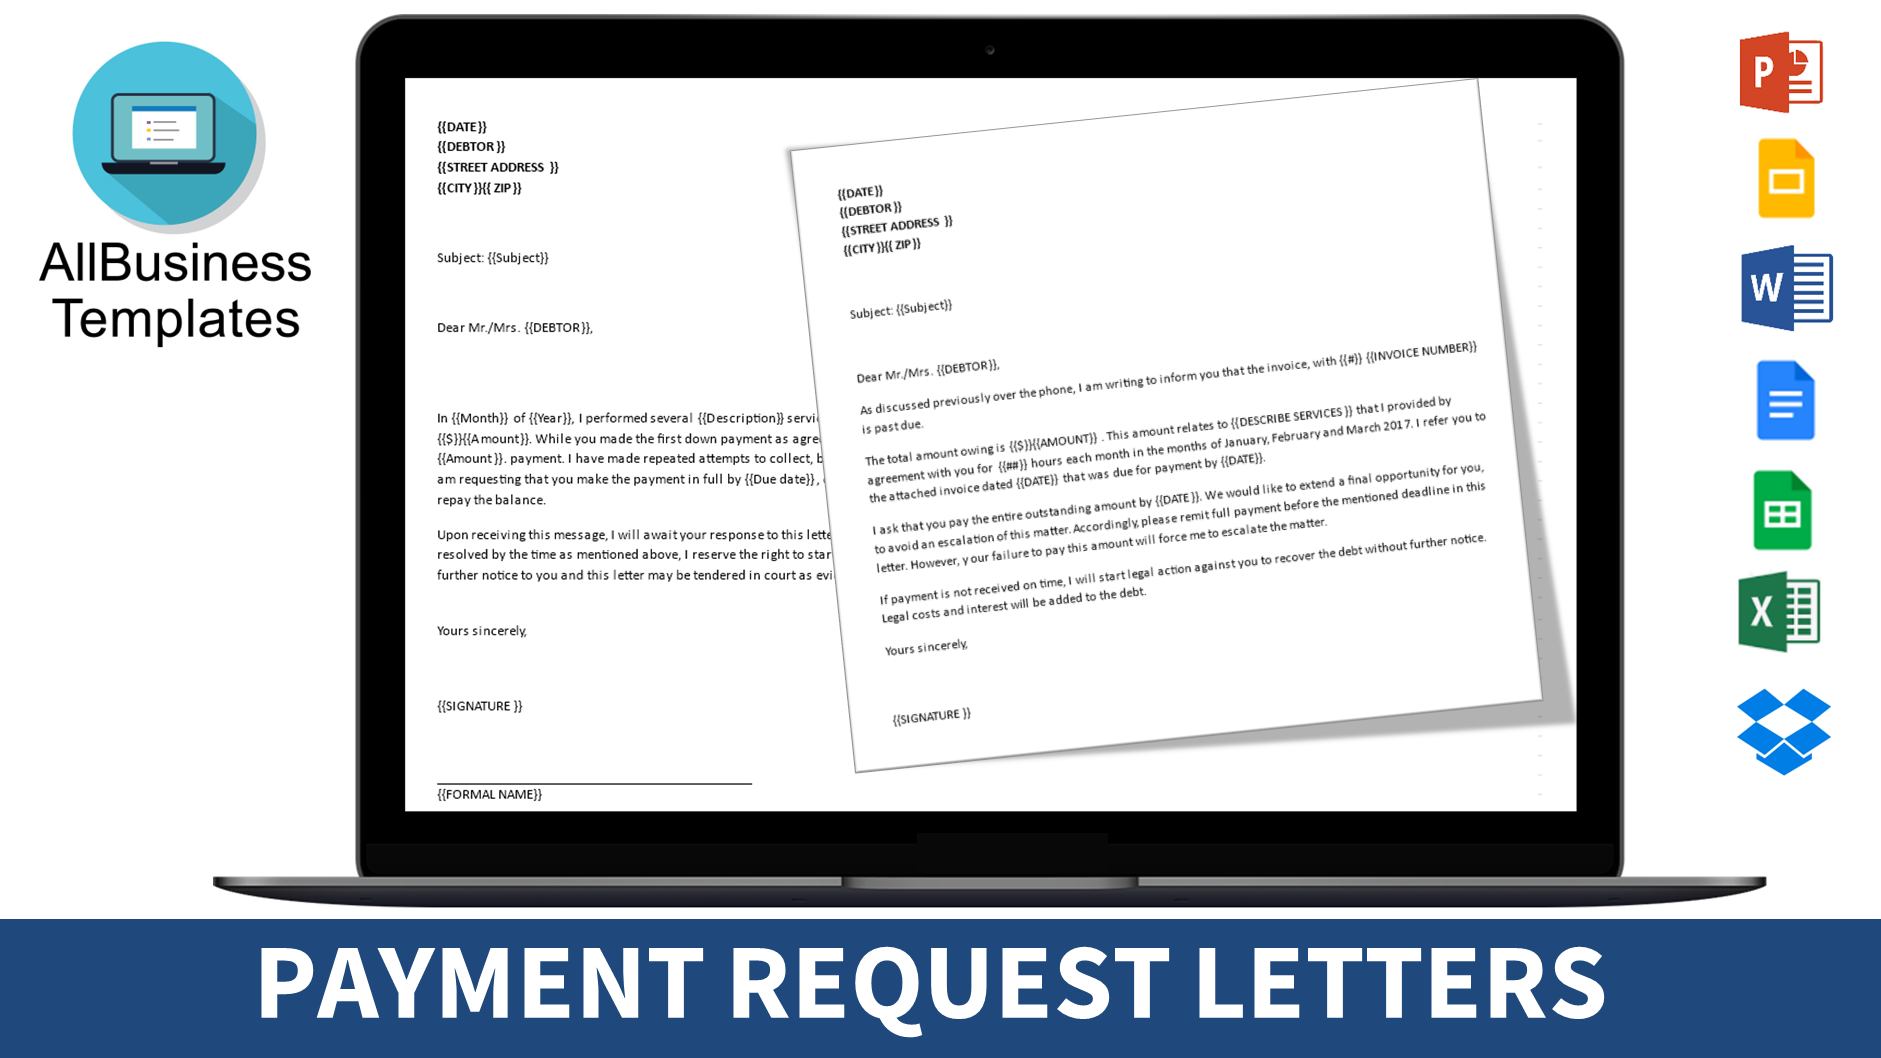 Demand Letter For Payment Template from www.allbusinesstemplates.com